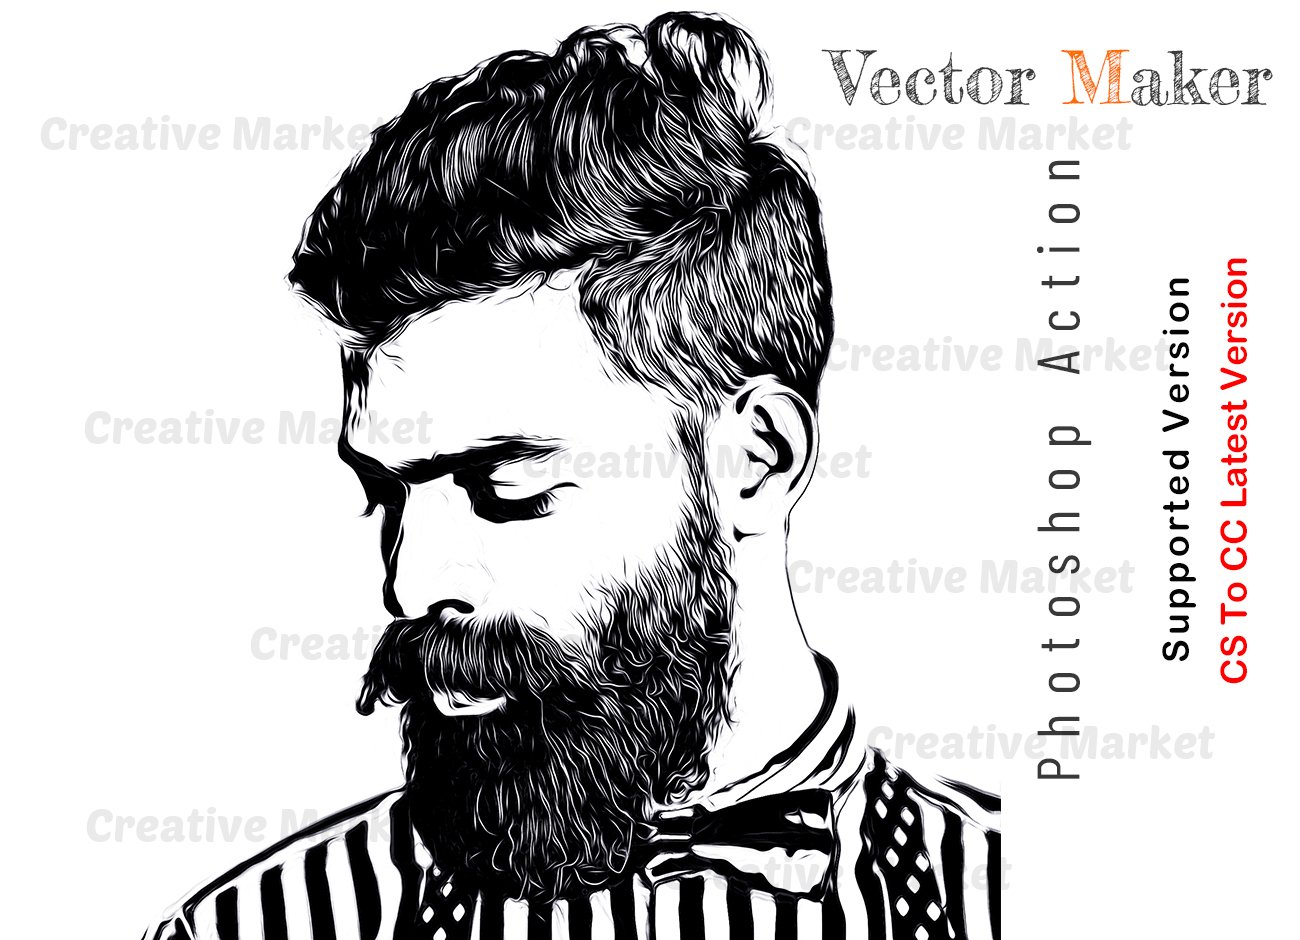 Vector Maker Photoshop Actioncover image.